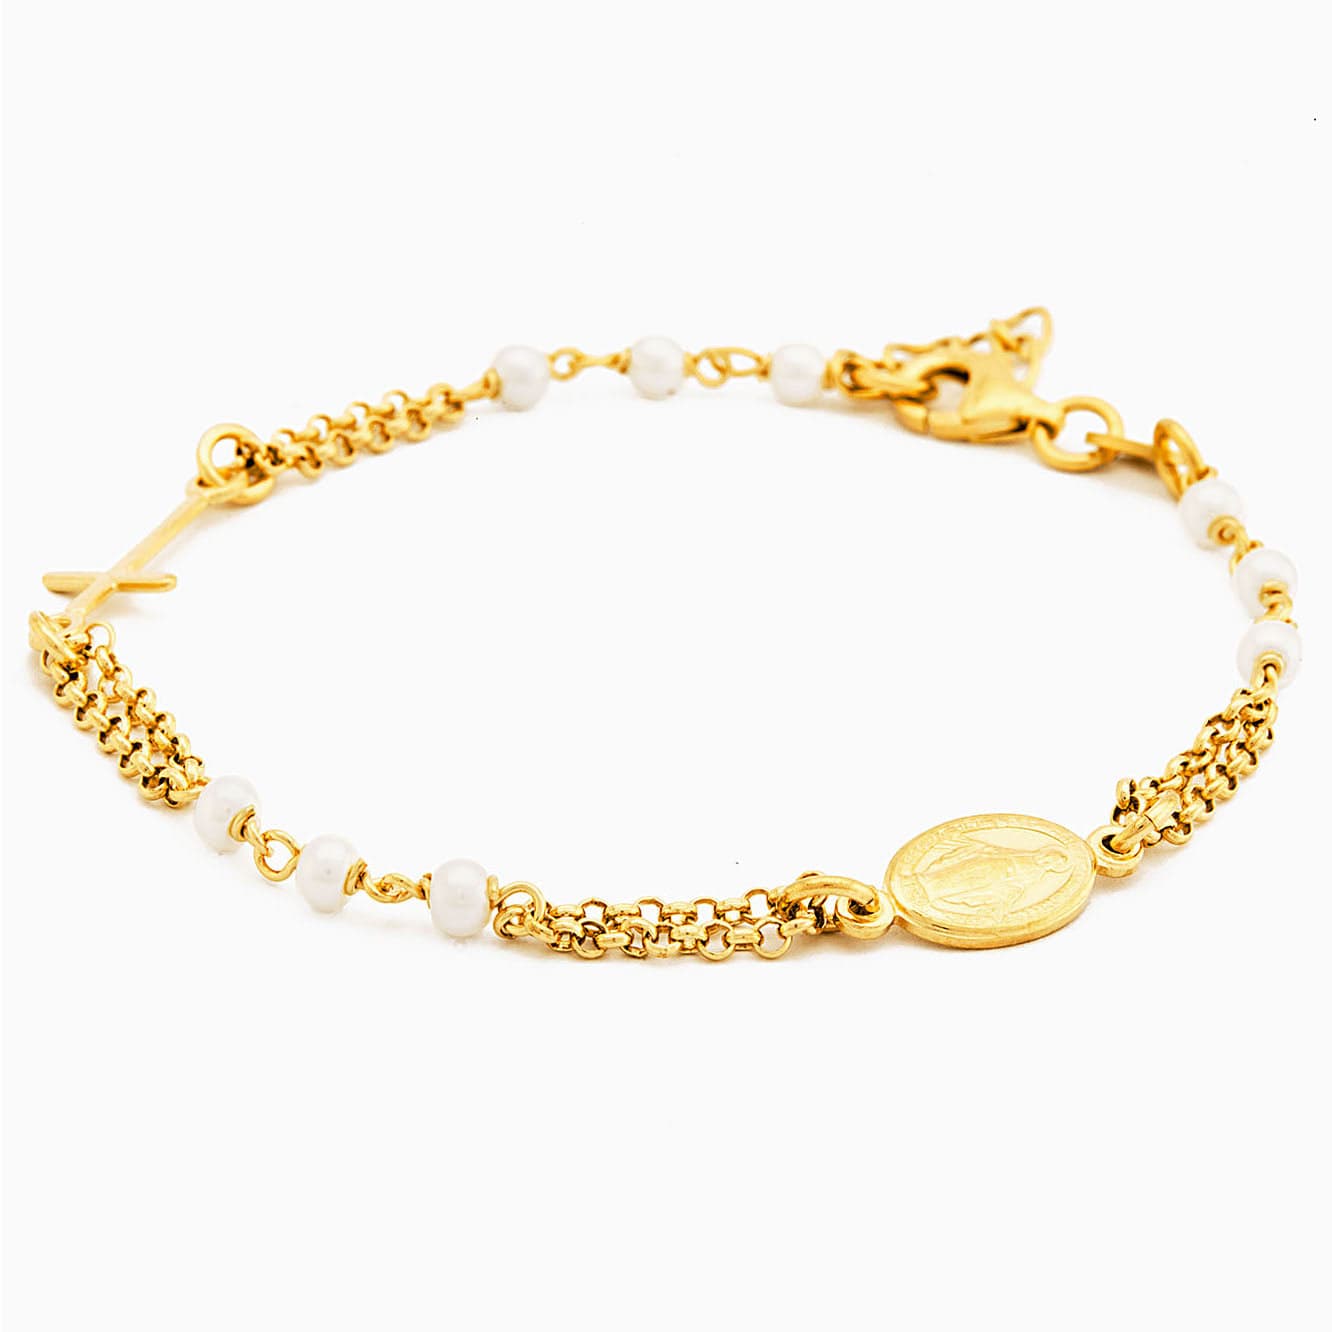 MONDO CATTOLICO Prayer Beads Gold / Cm 17.5 (6.9 in) STERLING SILVER ROSARY BRACELET SYNTHETIC PEARL FACETED BEADS